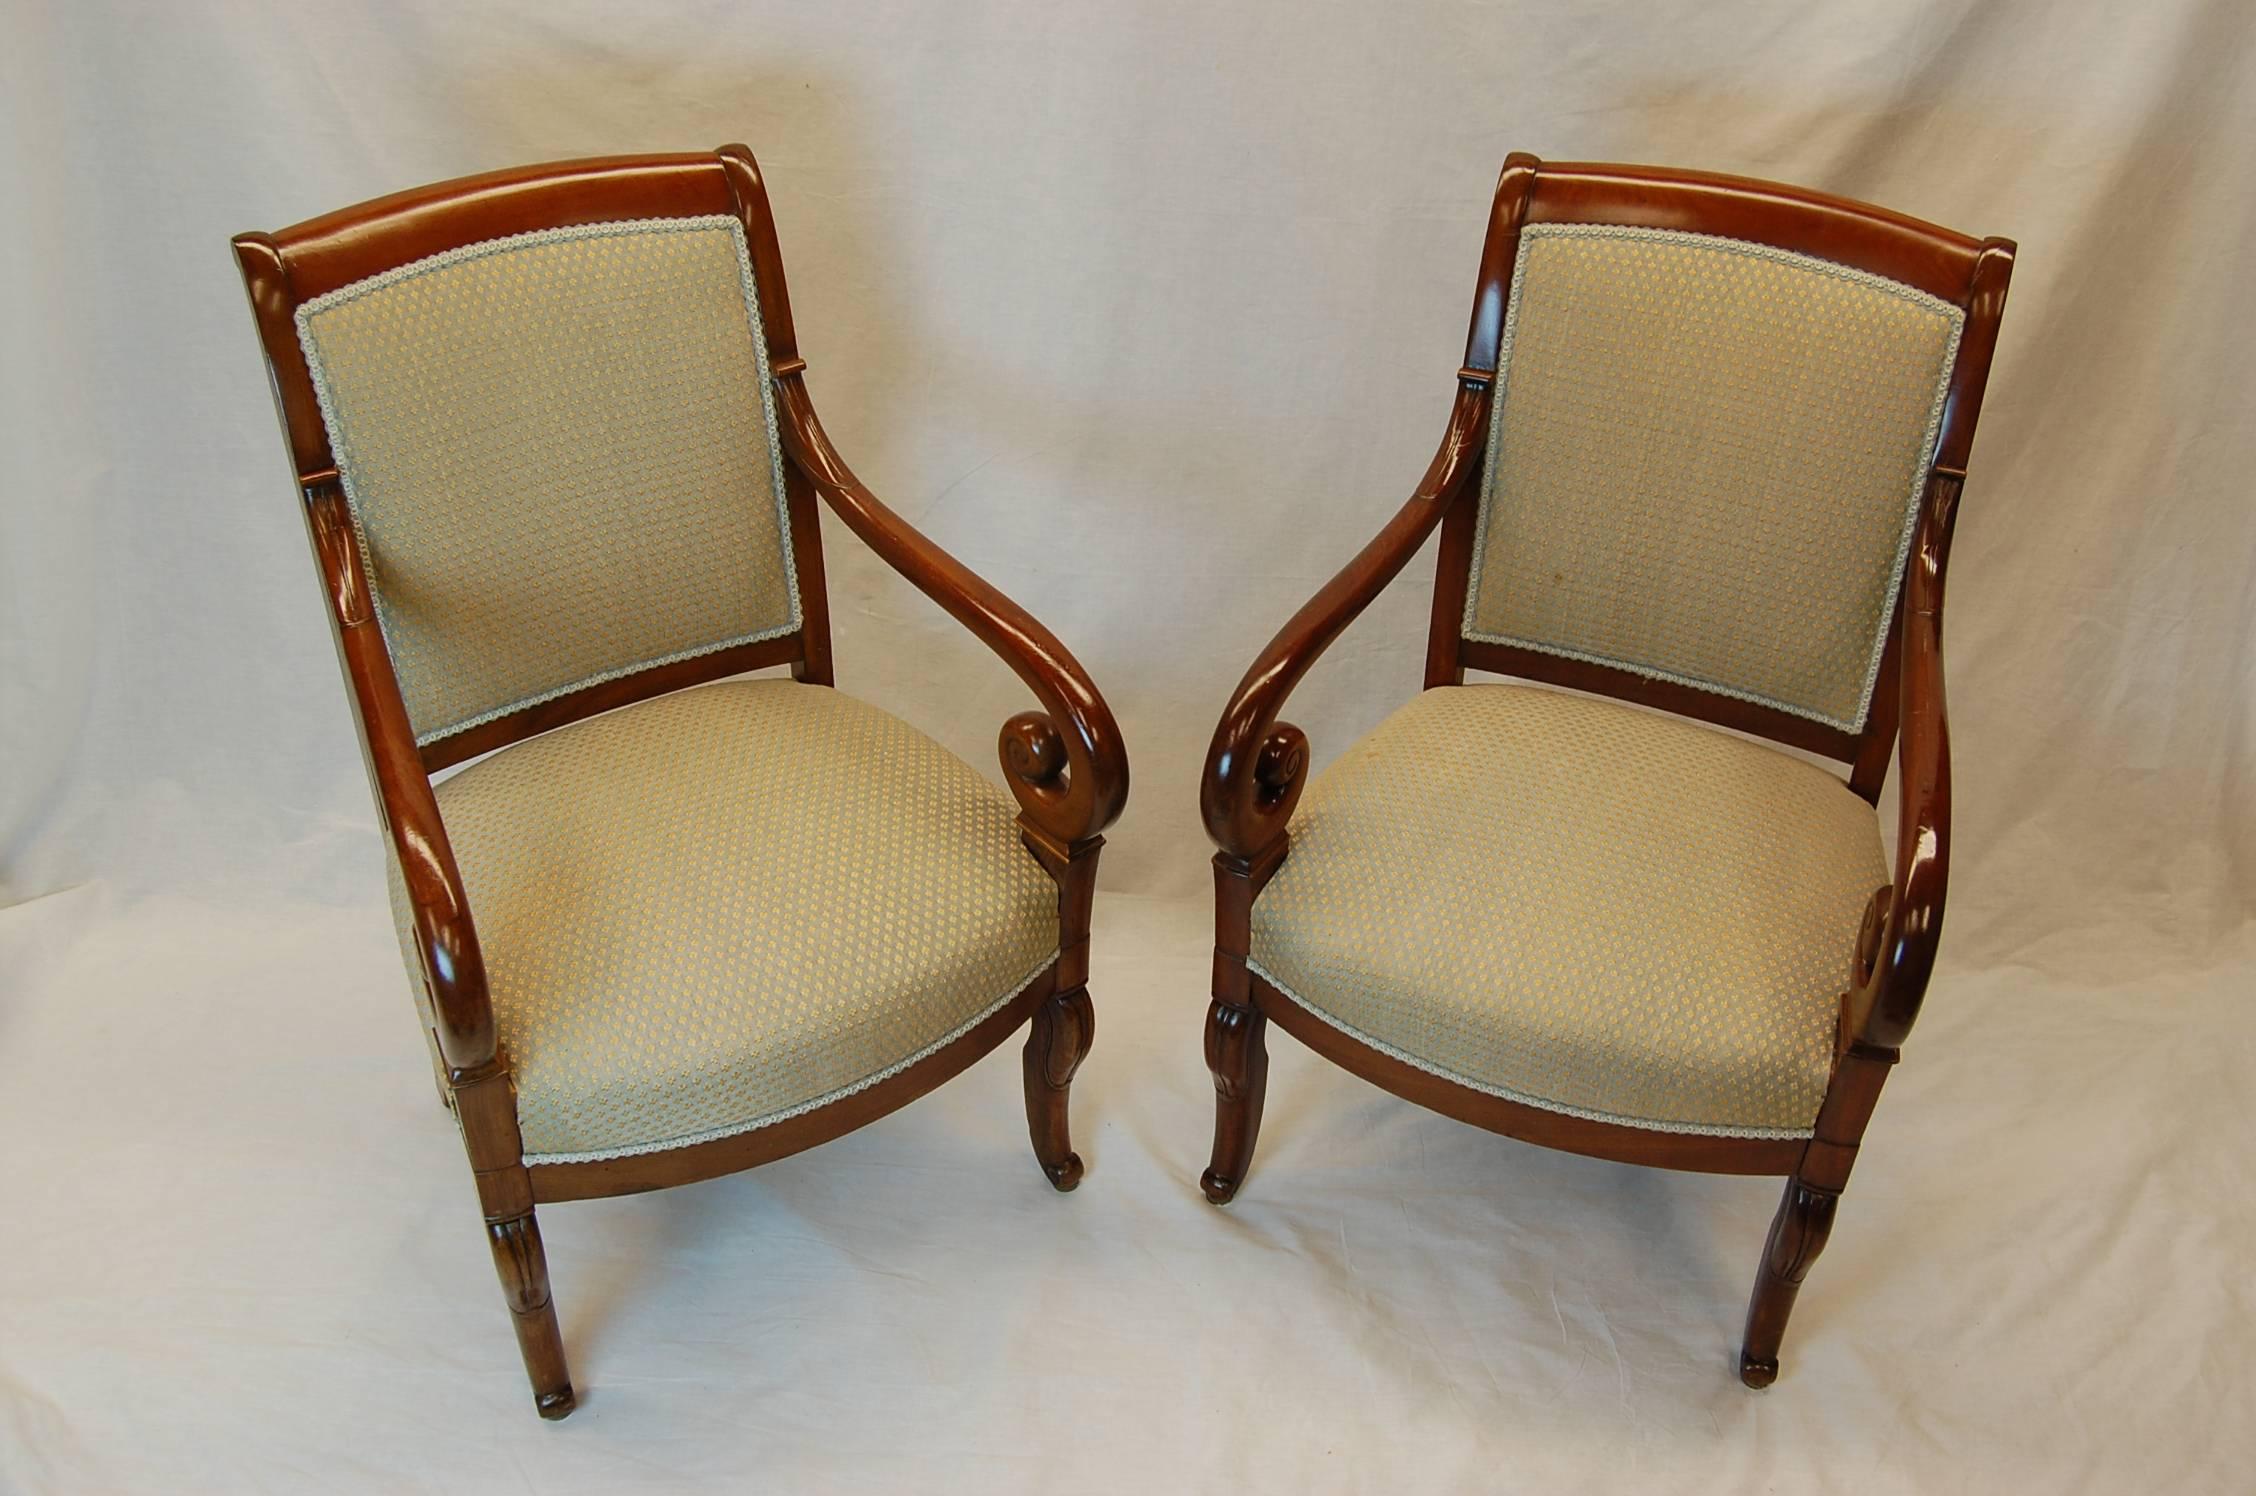 Pair of beautiful mahogany chairs in old horse hair fabric from Clarence House. Frames are tight and ready to be recovered if desired.